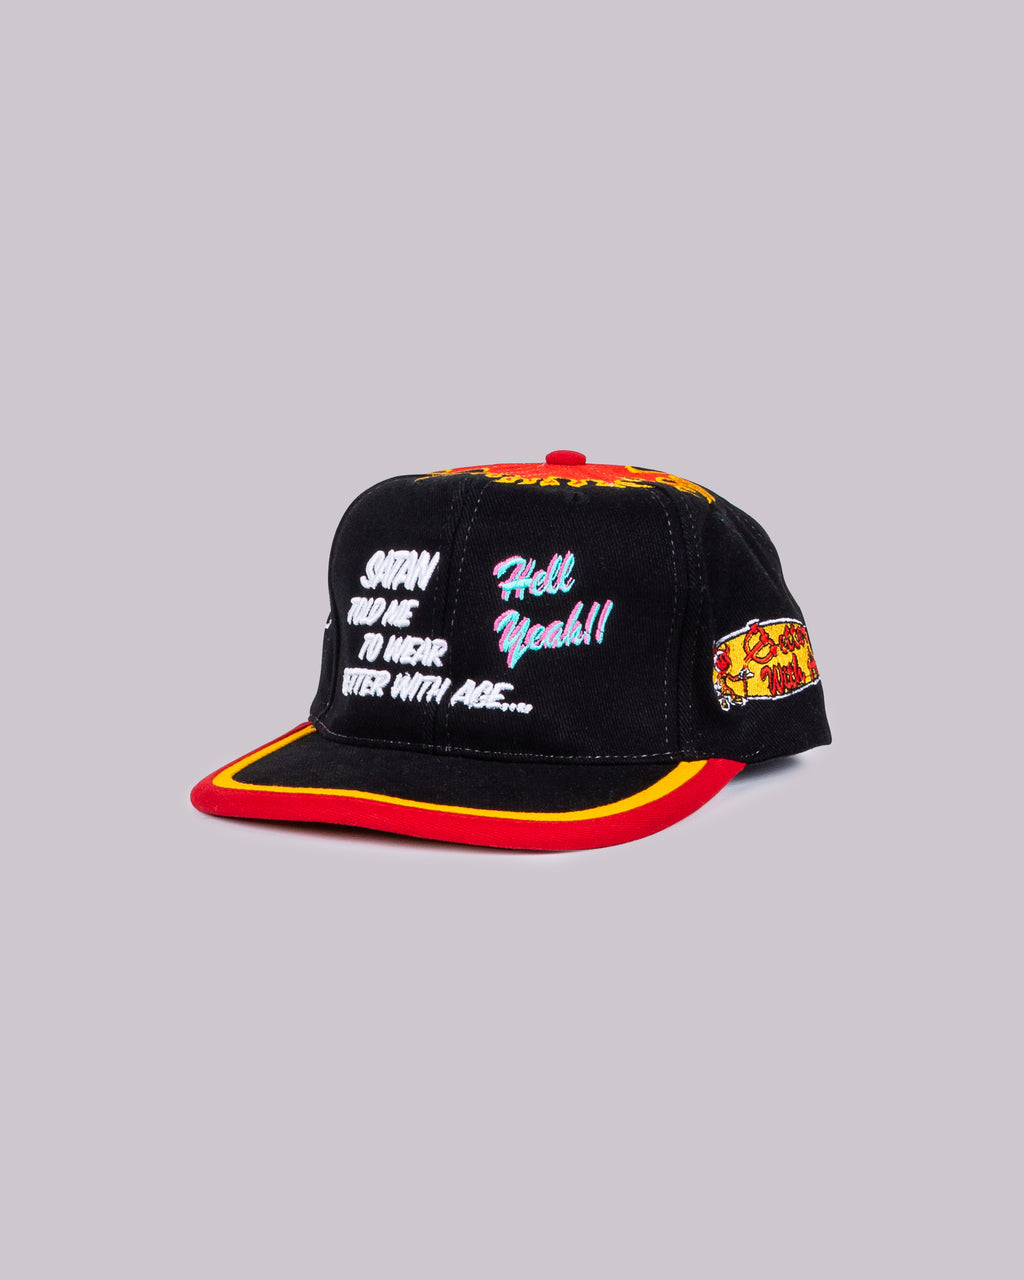 "HELL YEAH" HAT